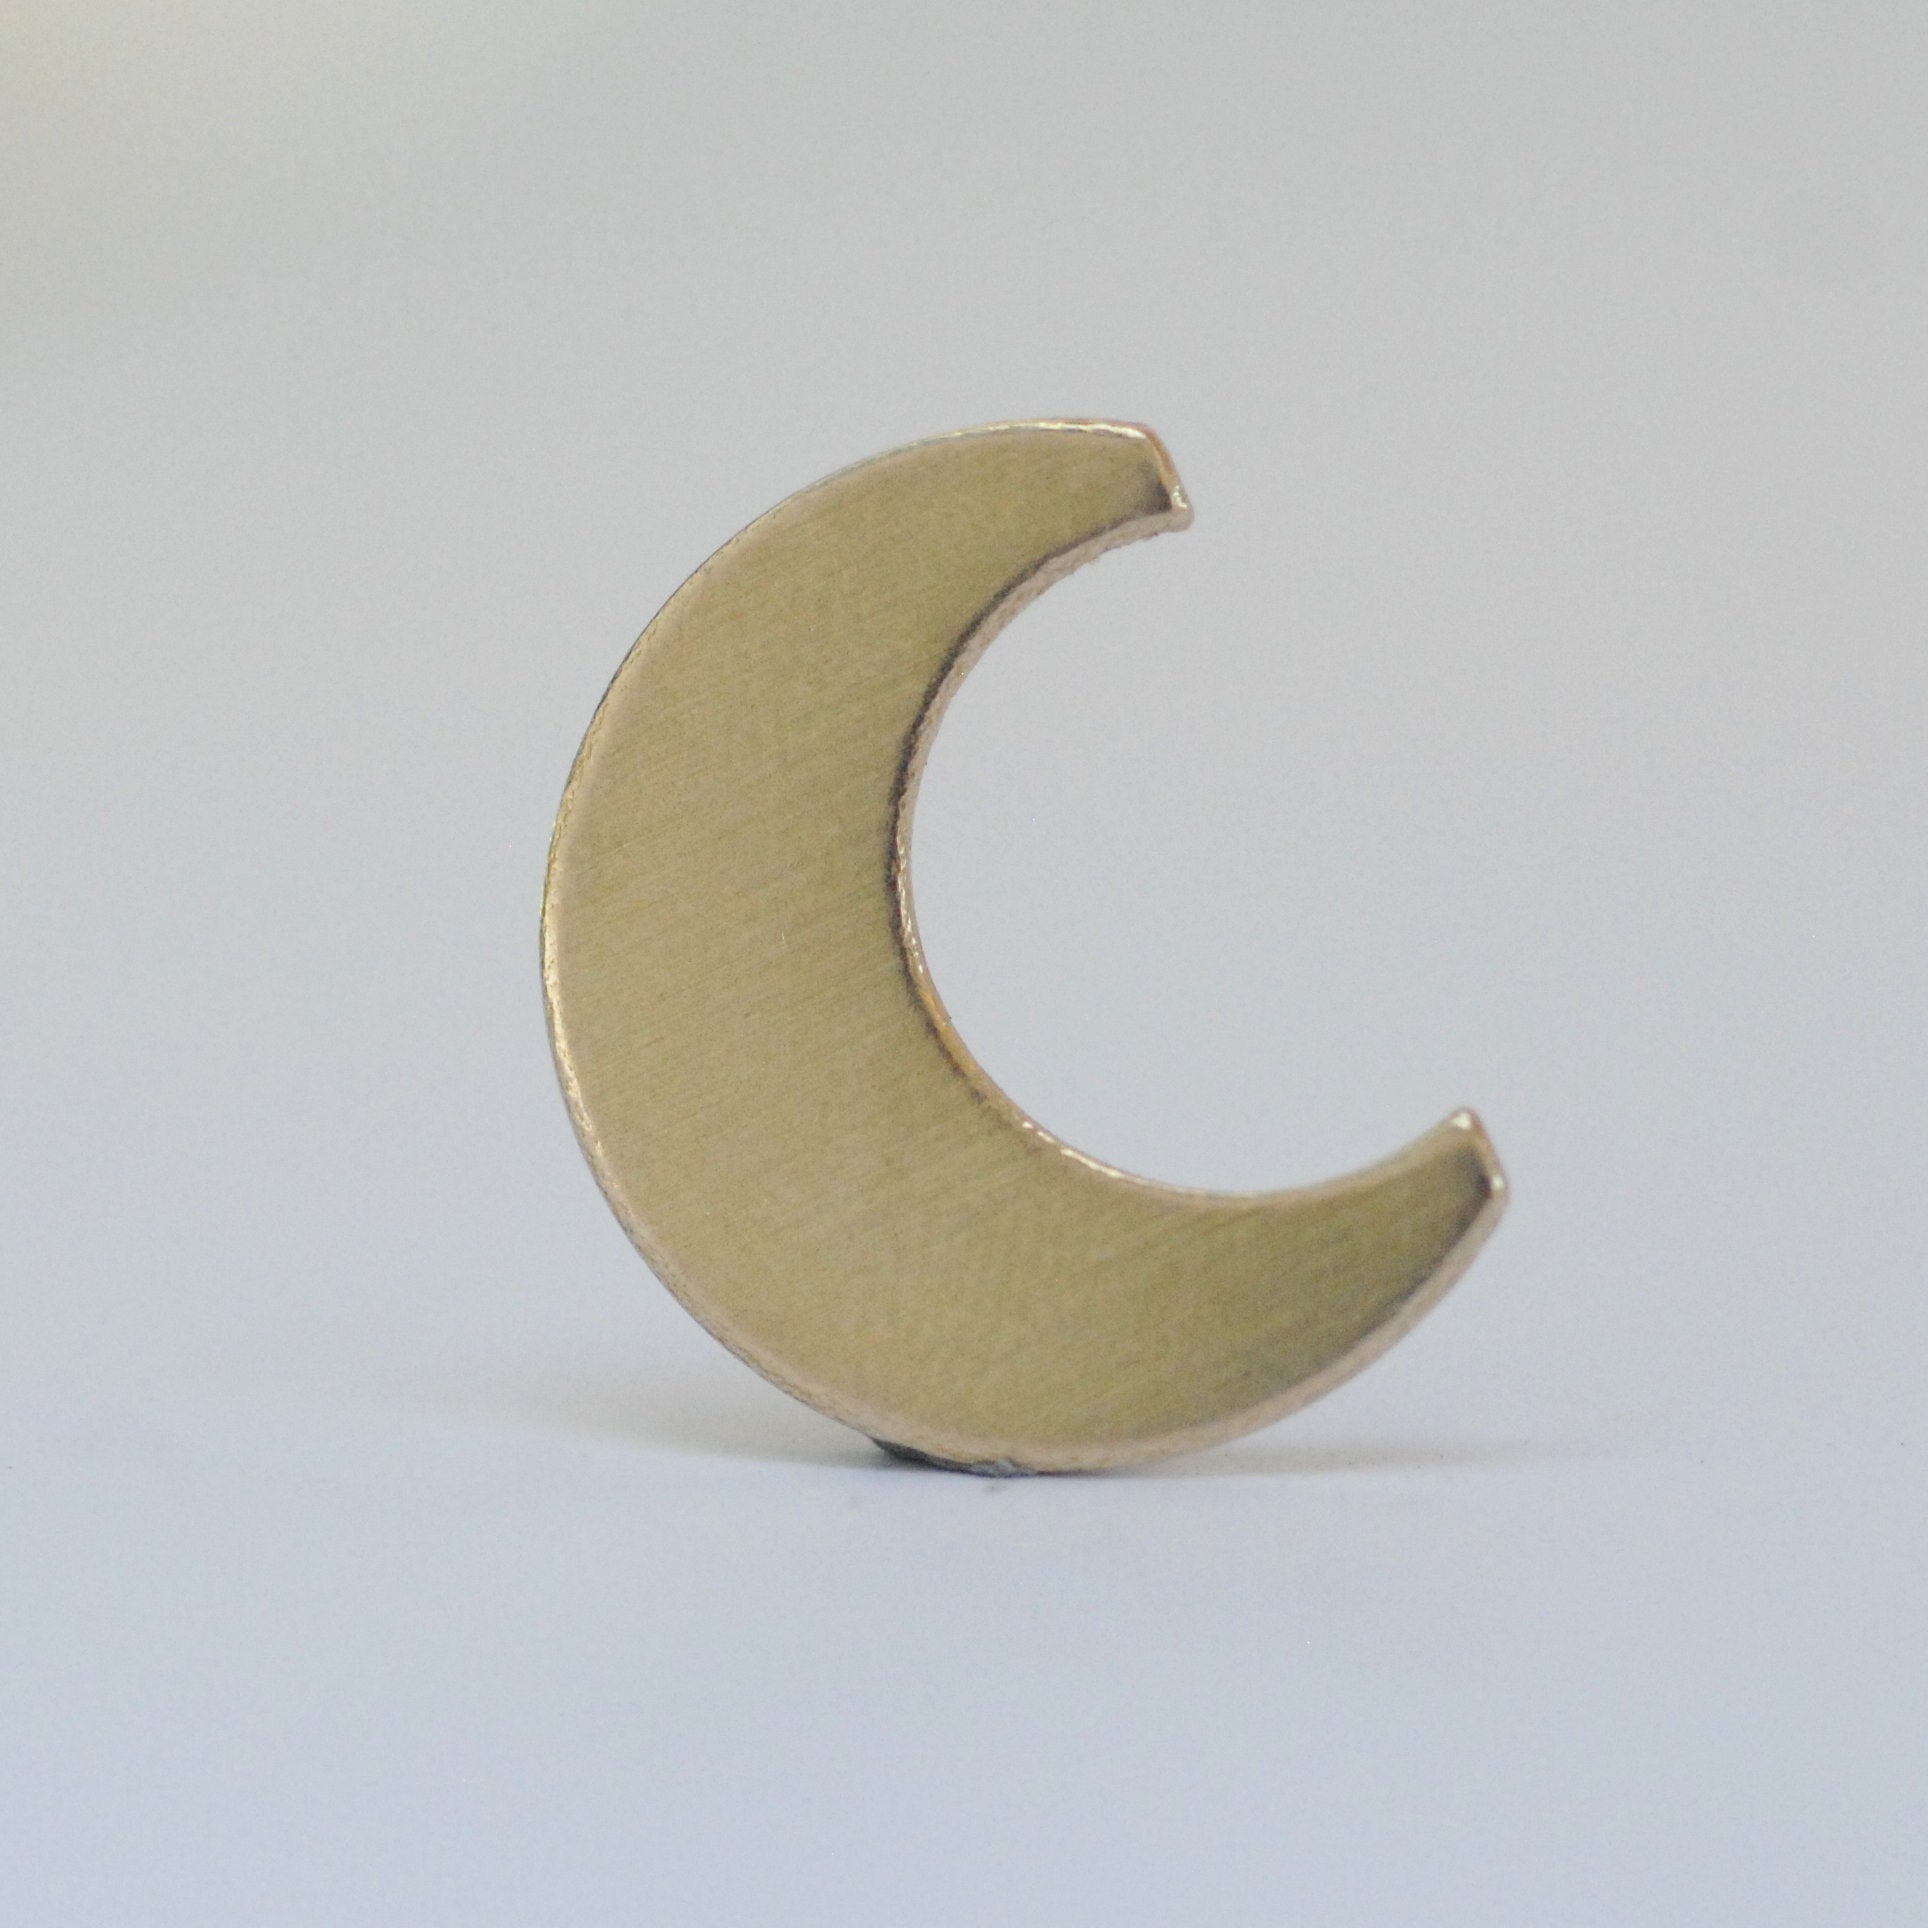 Perfect petite Moon blanks for making jewelry 16mm x 12.8mm 20g 22g 24g copper, brass, bronze, nickel silver